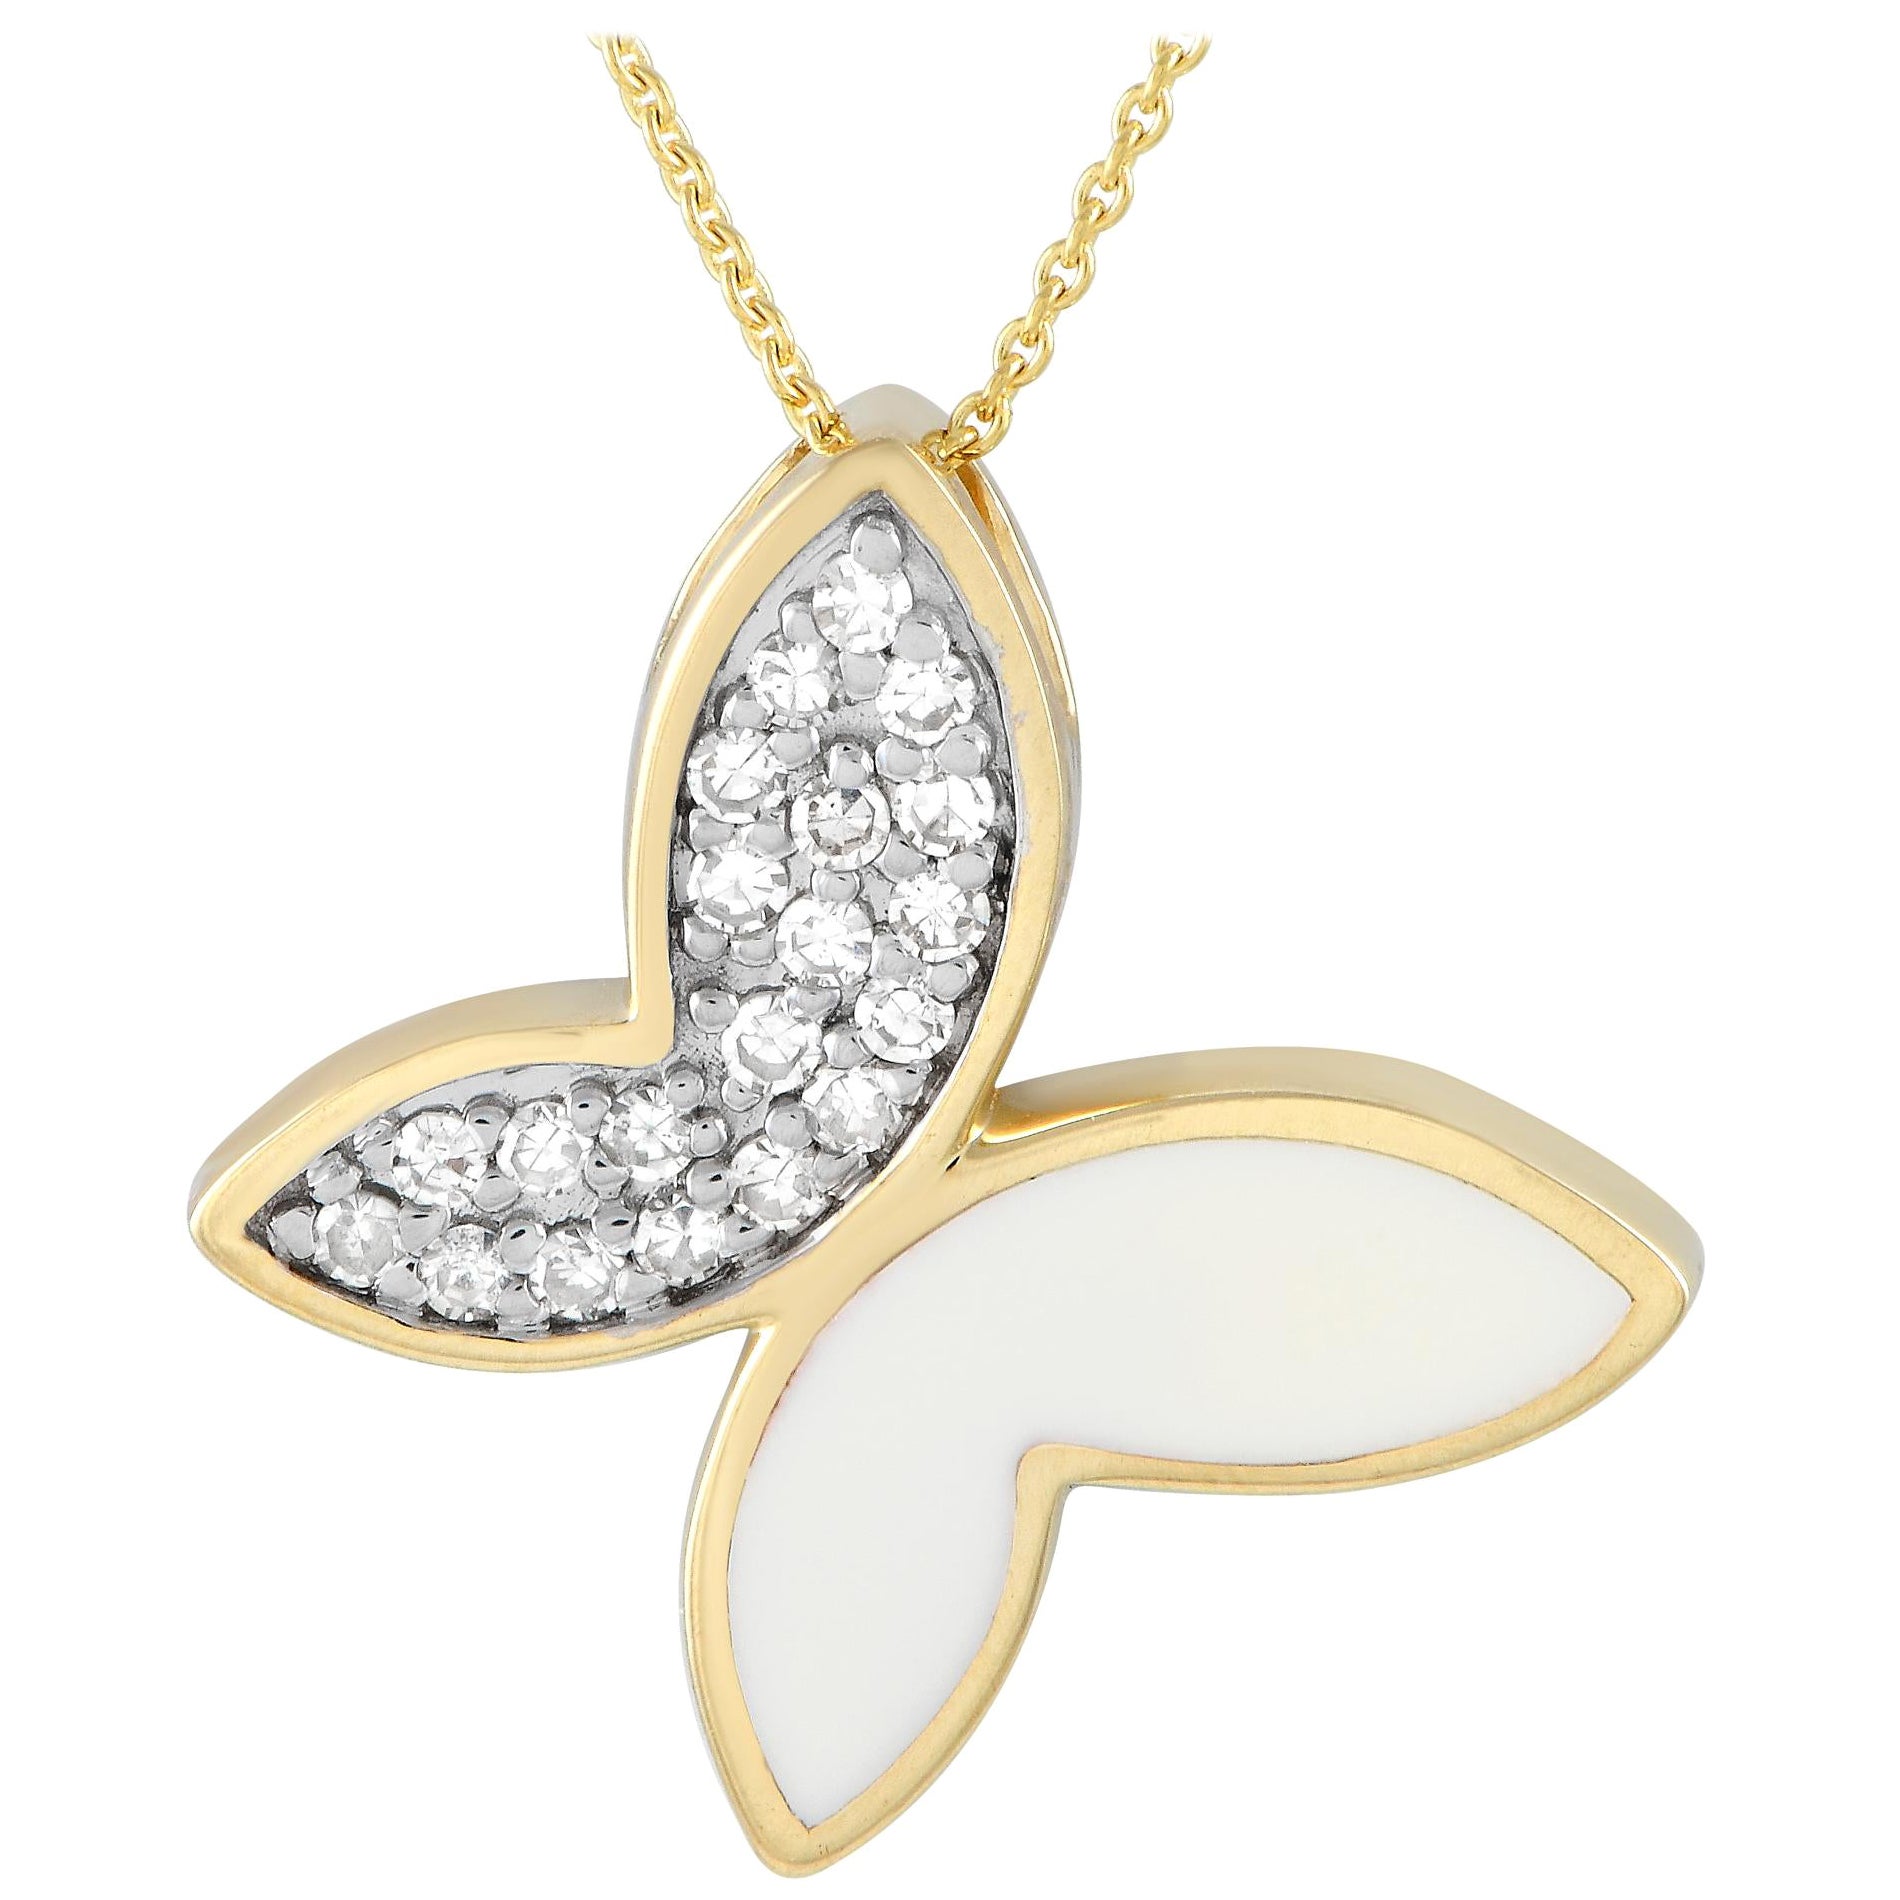 LB Exclusive 14K Yellow Gold 0.15ct Diamond Butterfly Pendant Necklace PN15064W For Sale